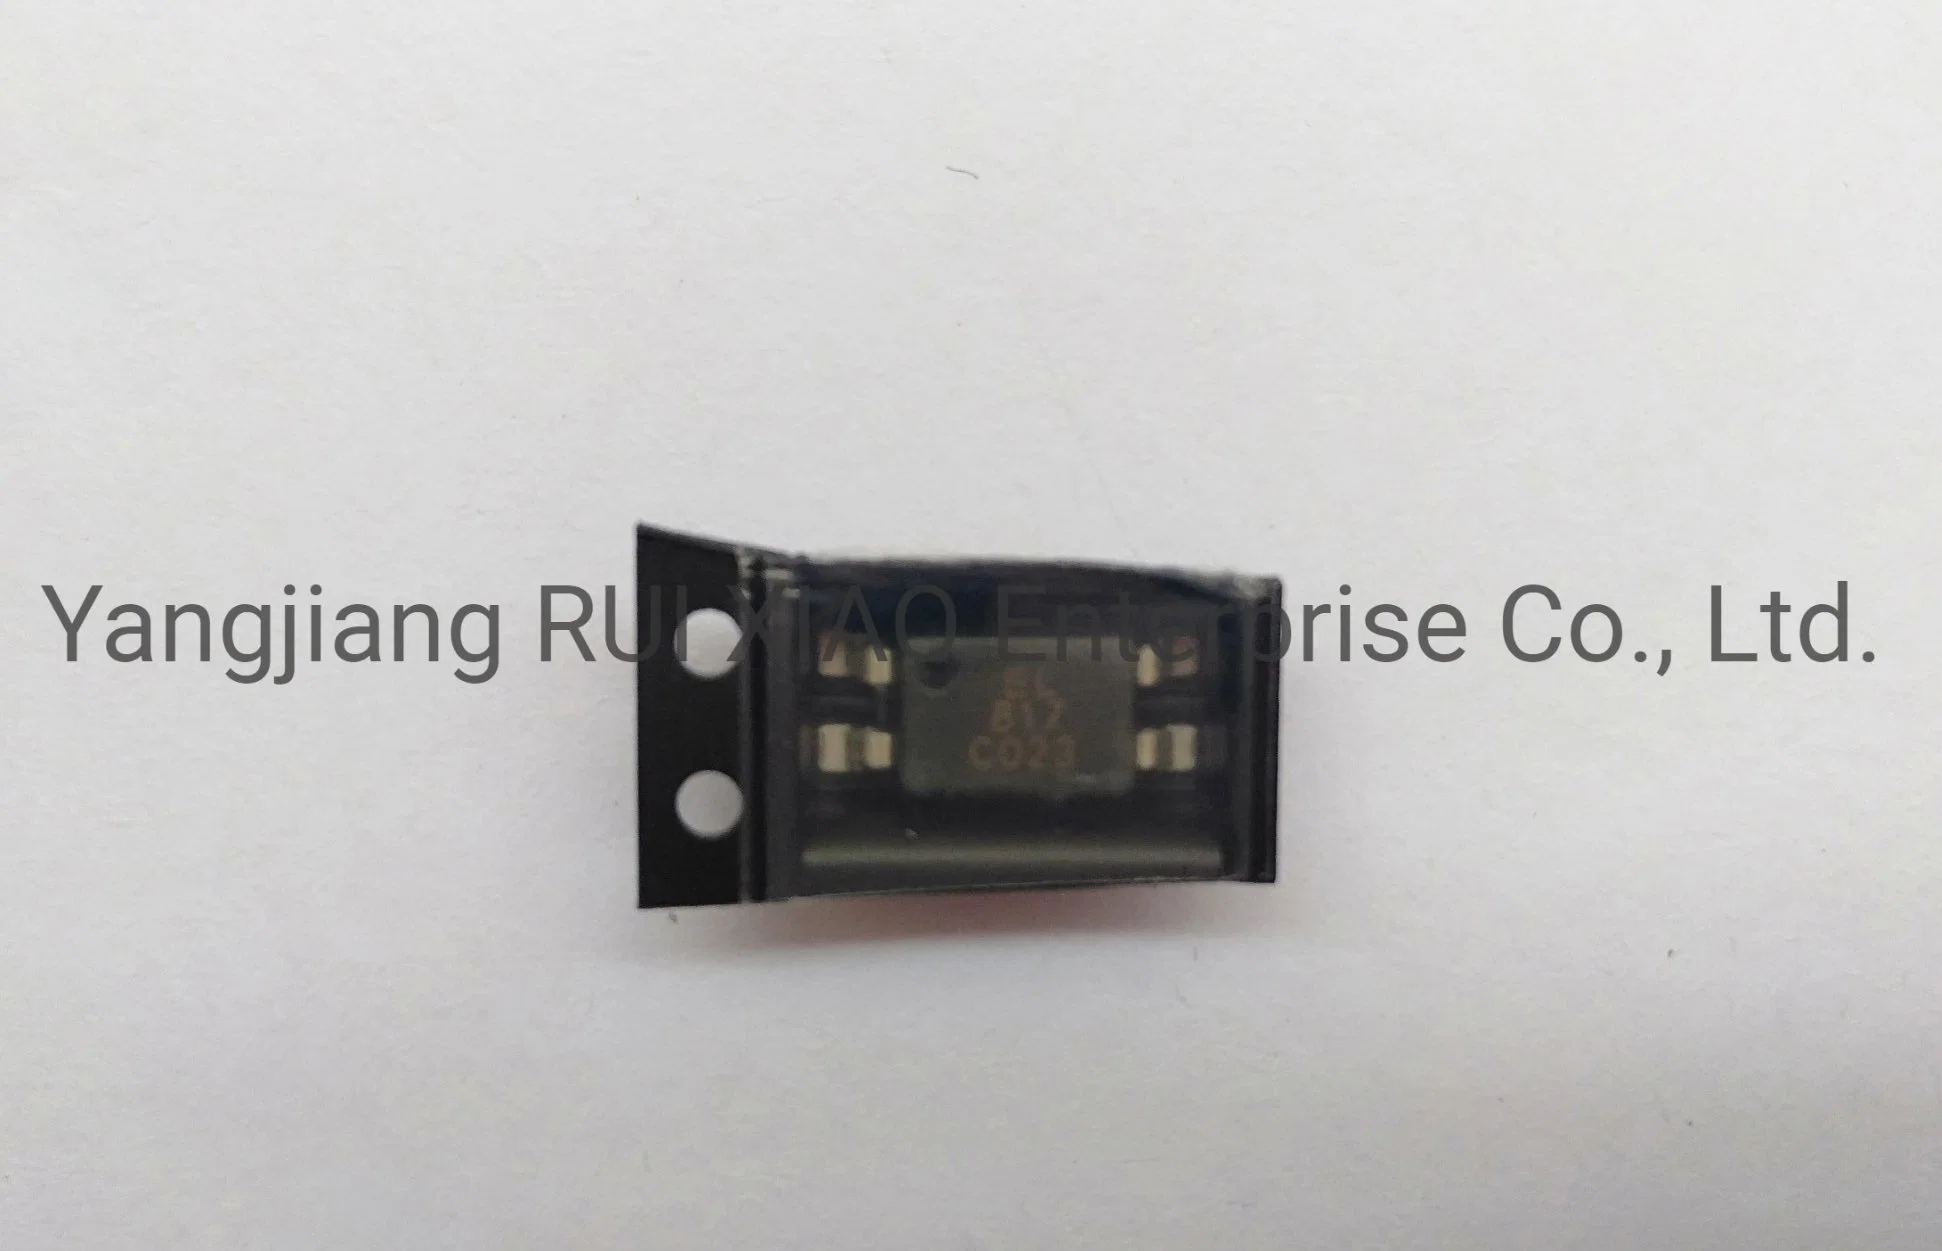 Photocoupler EL817 Sop-4 IC, Electronic Components, Integrated Circuit, Home Appliance, Automatic Vending Machine, LED